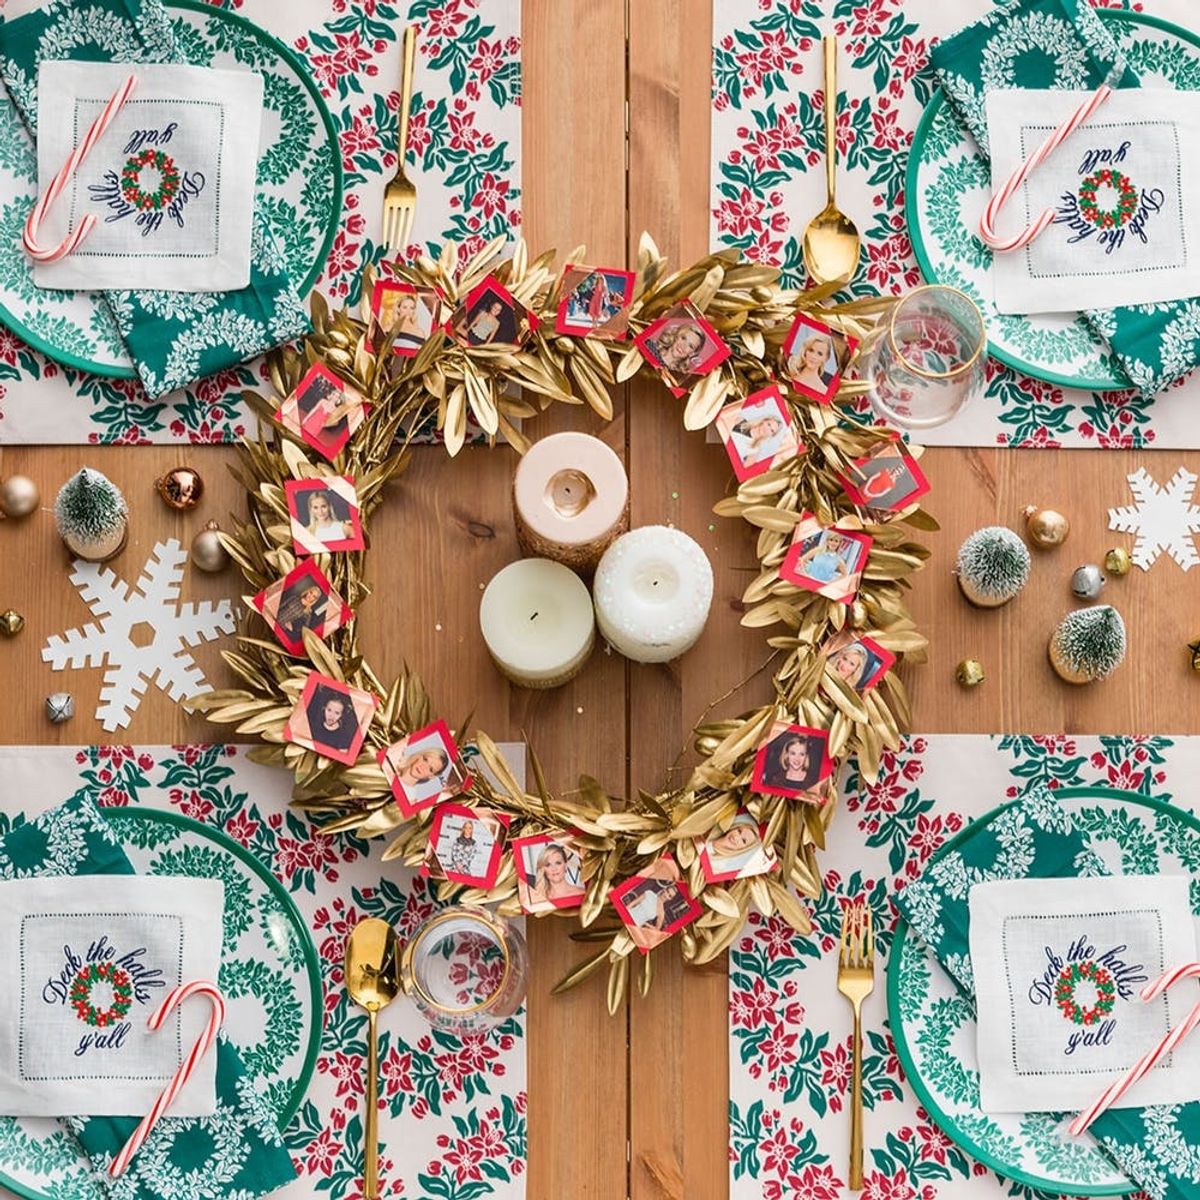 How to Make Your Own “Wreath Witherspoon” for the Holidays